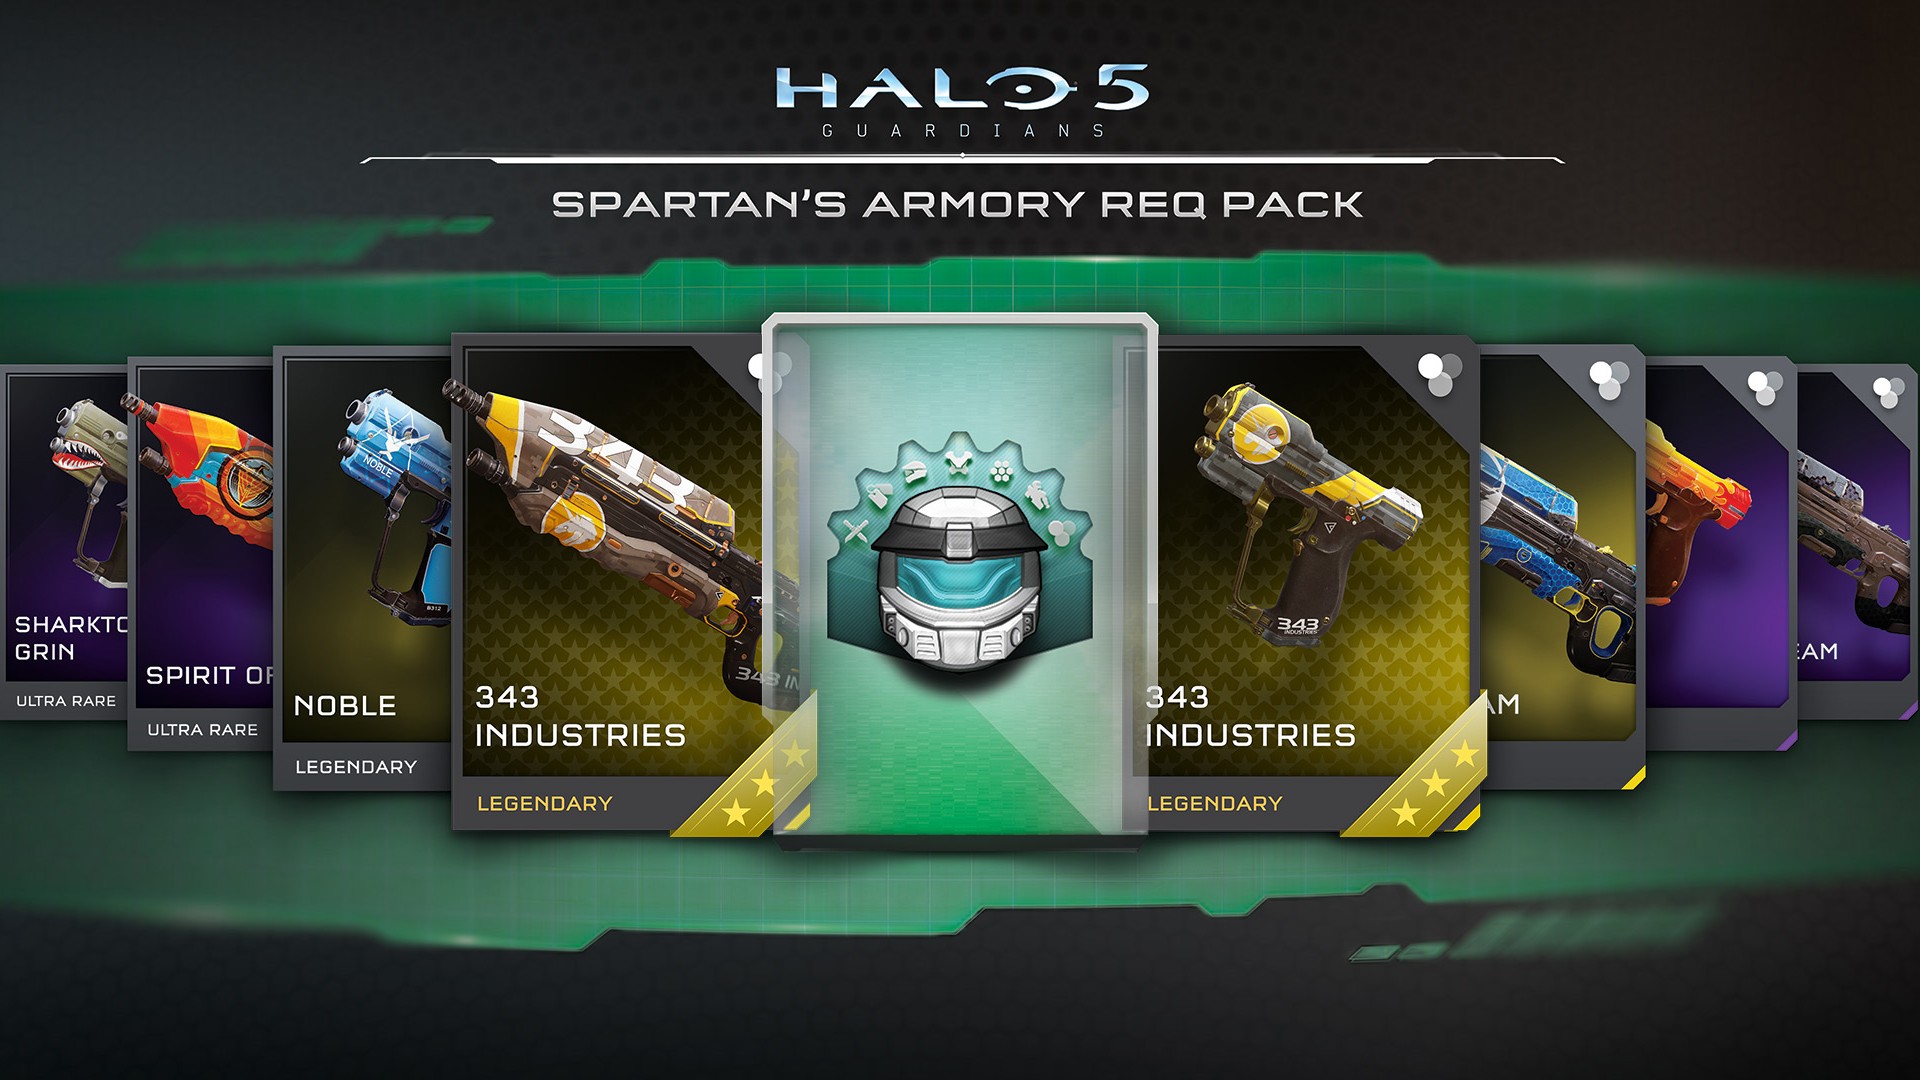 A promotional image for one of Halo 5's various REQ Packs.